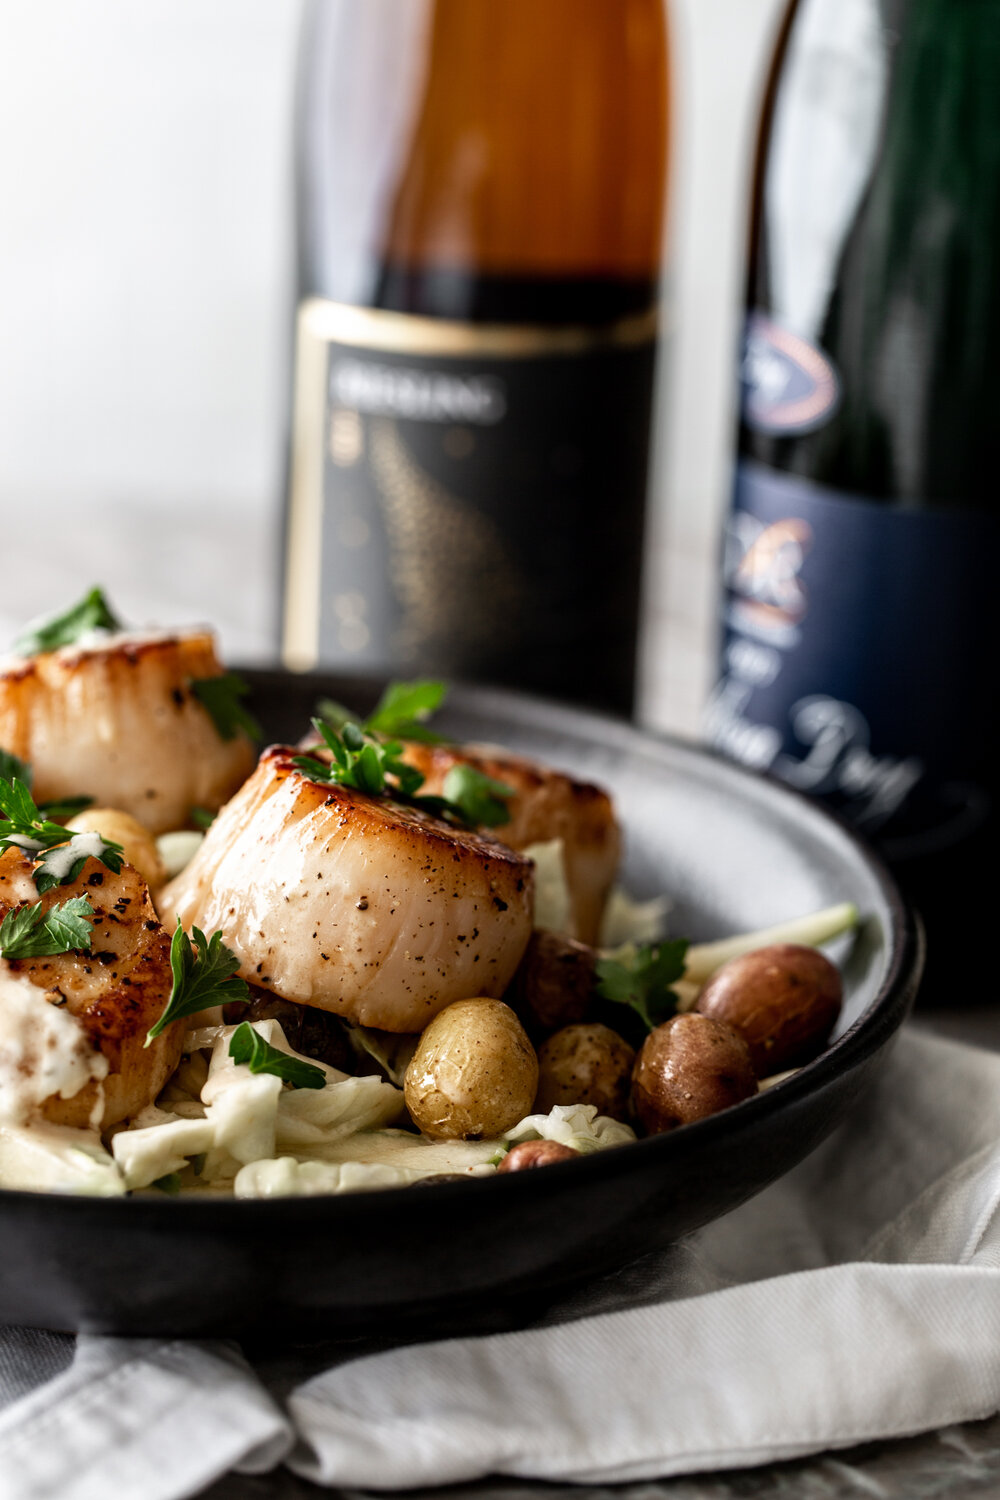 Seared Scallops with Green Apple Slaw, Roasted Potatoes & Lemon Butter Pan Sauce Paired with German Riesling